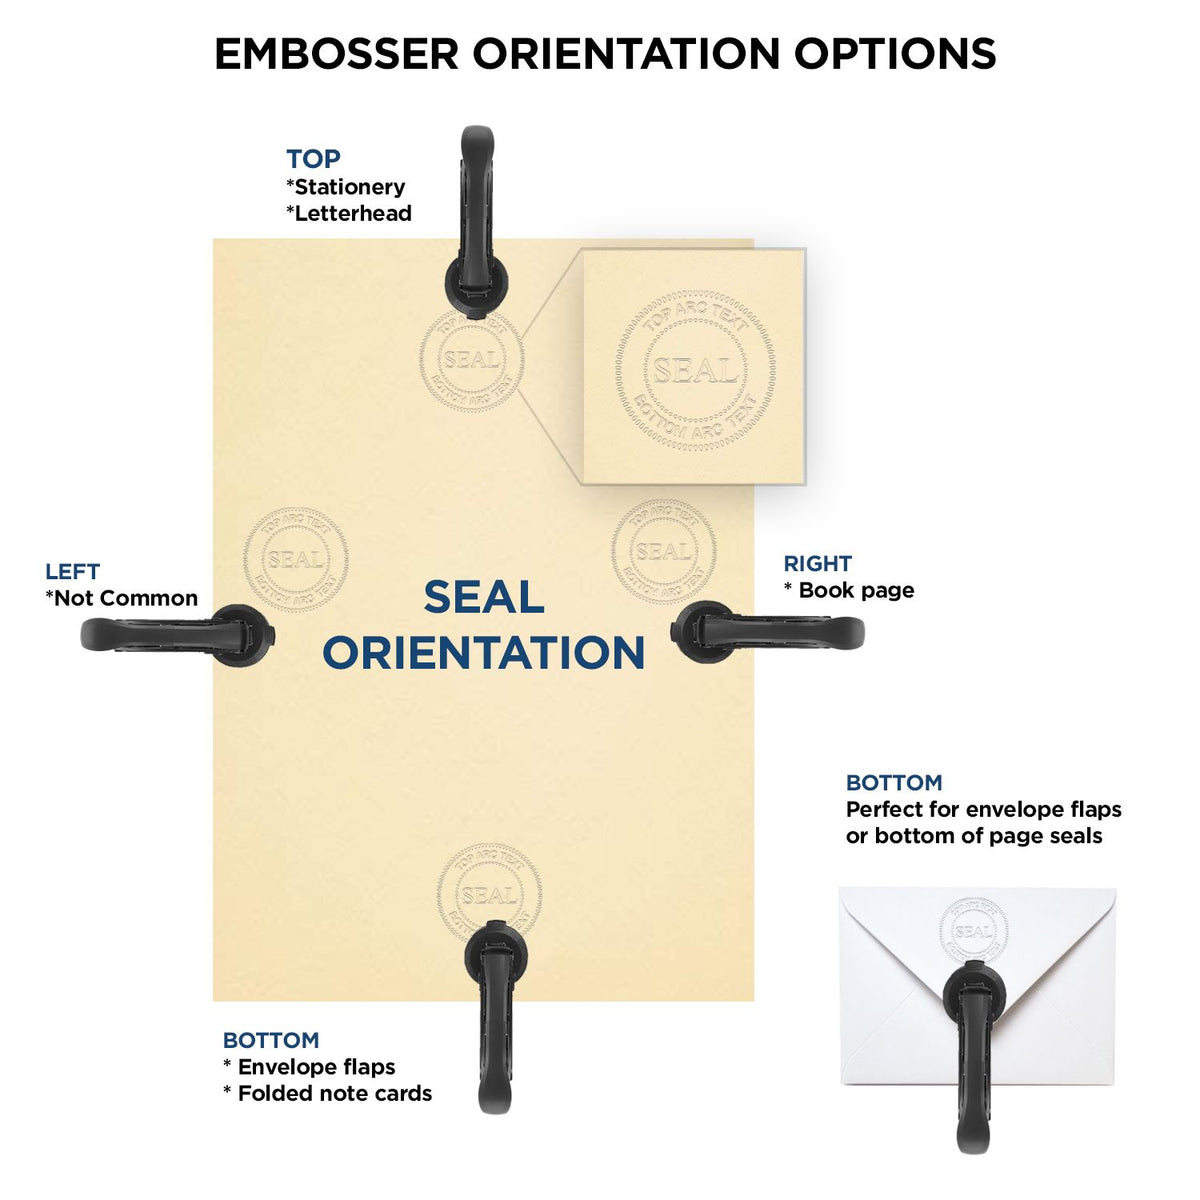 An infographic for the State of Alaska Extended Long Reach Engineer Seal showing embosser orientation, this is showing examples of a top, bottom, right and left insert.